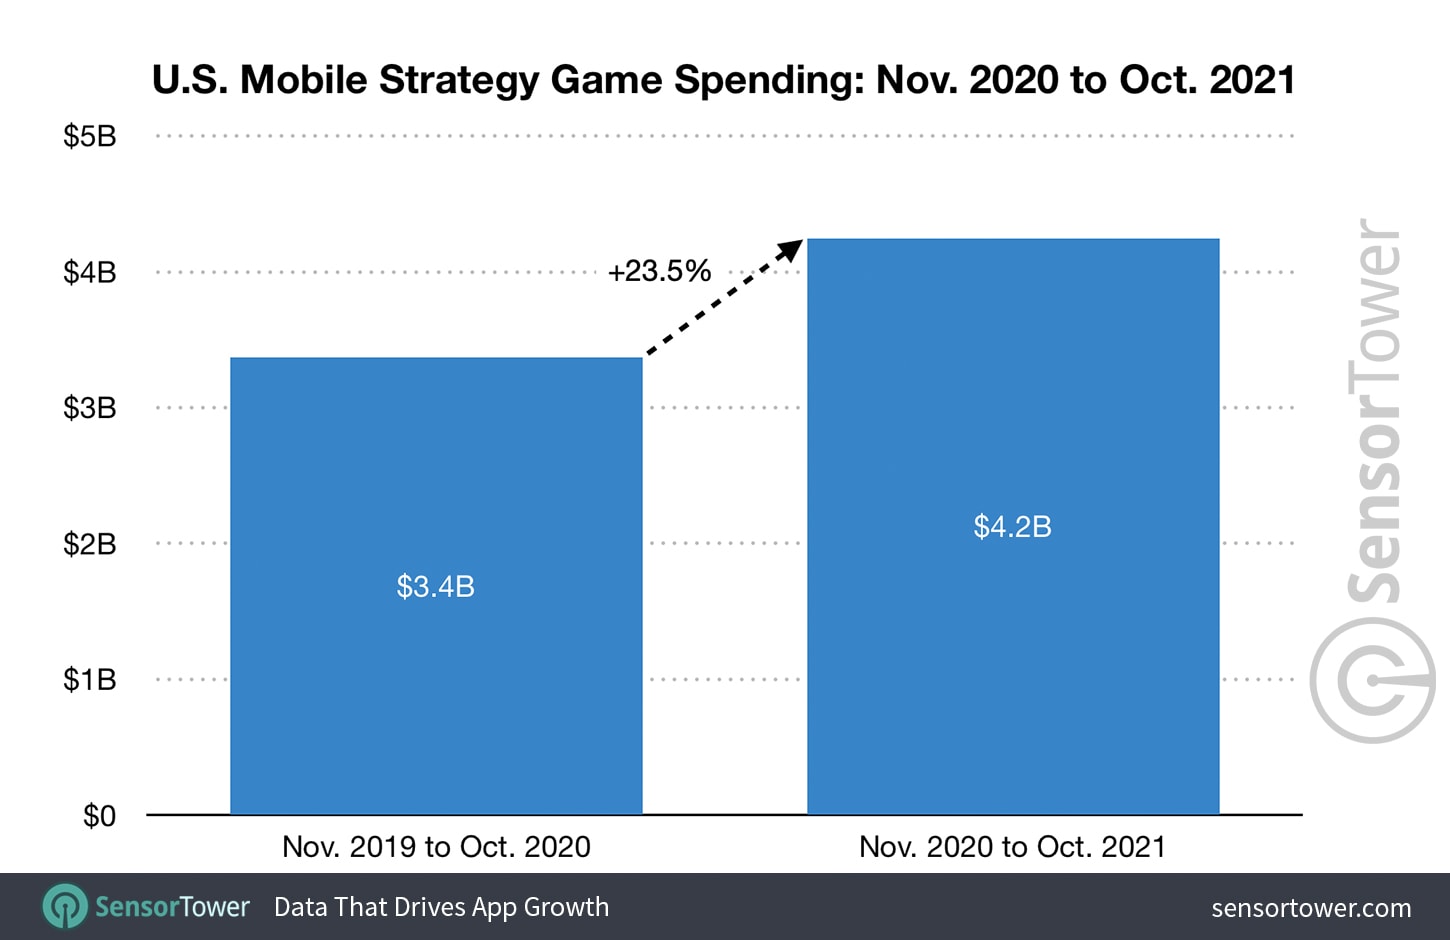 Mobile strategy game spending statistics